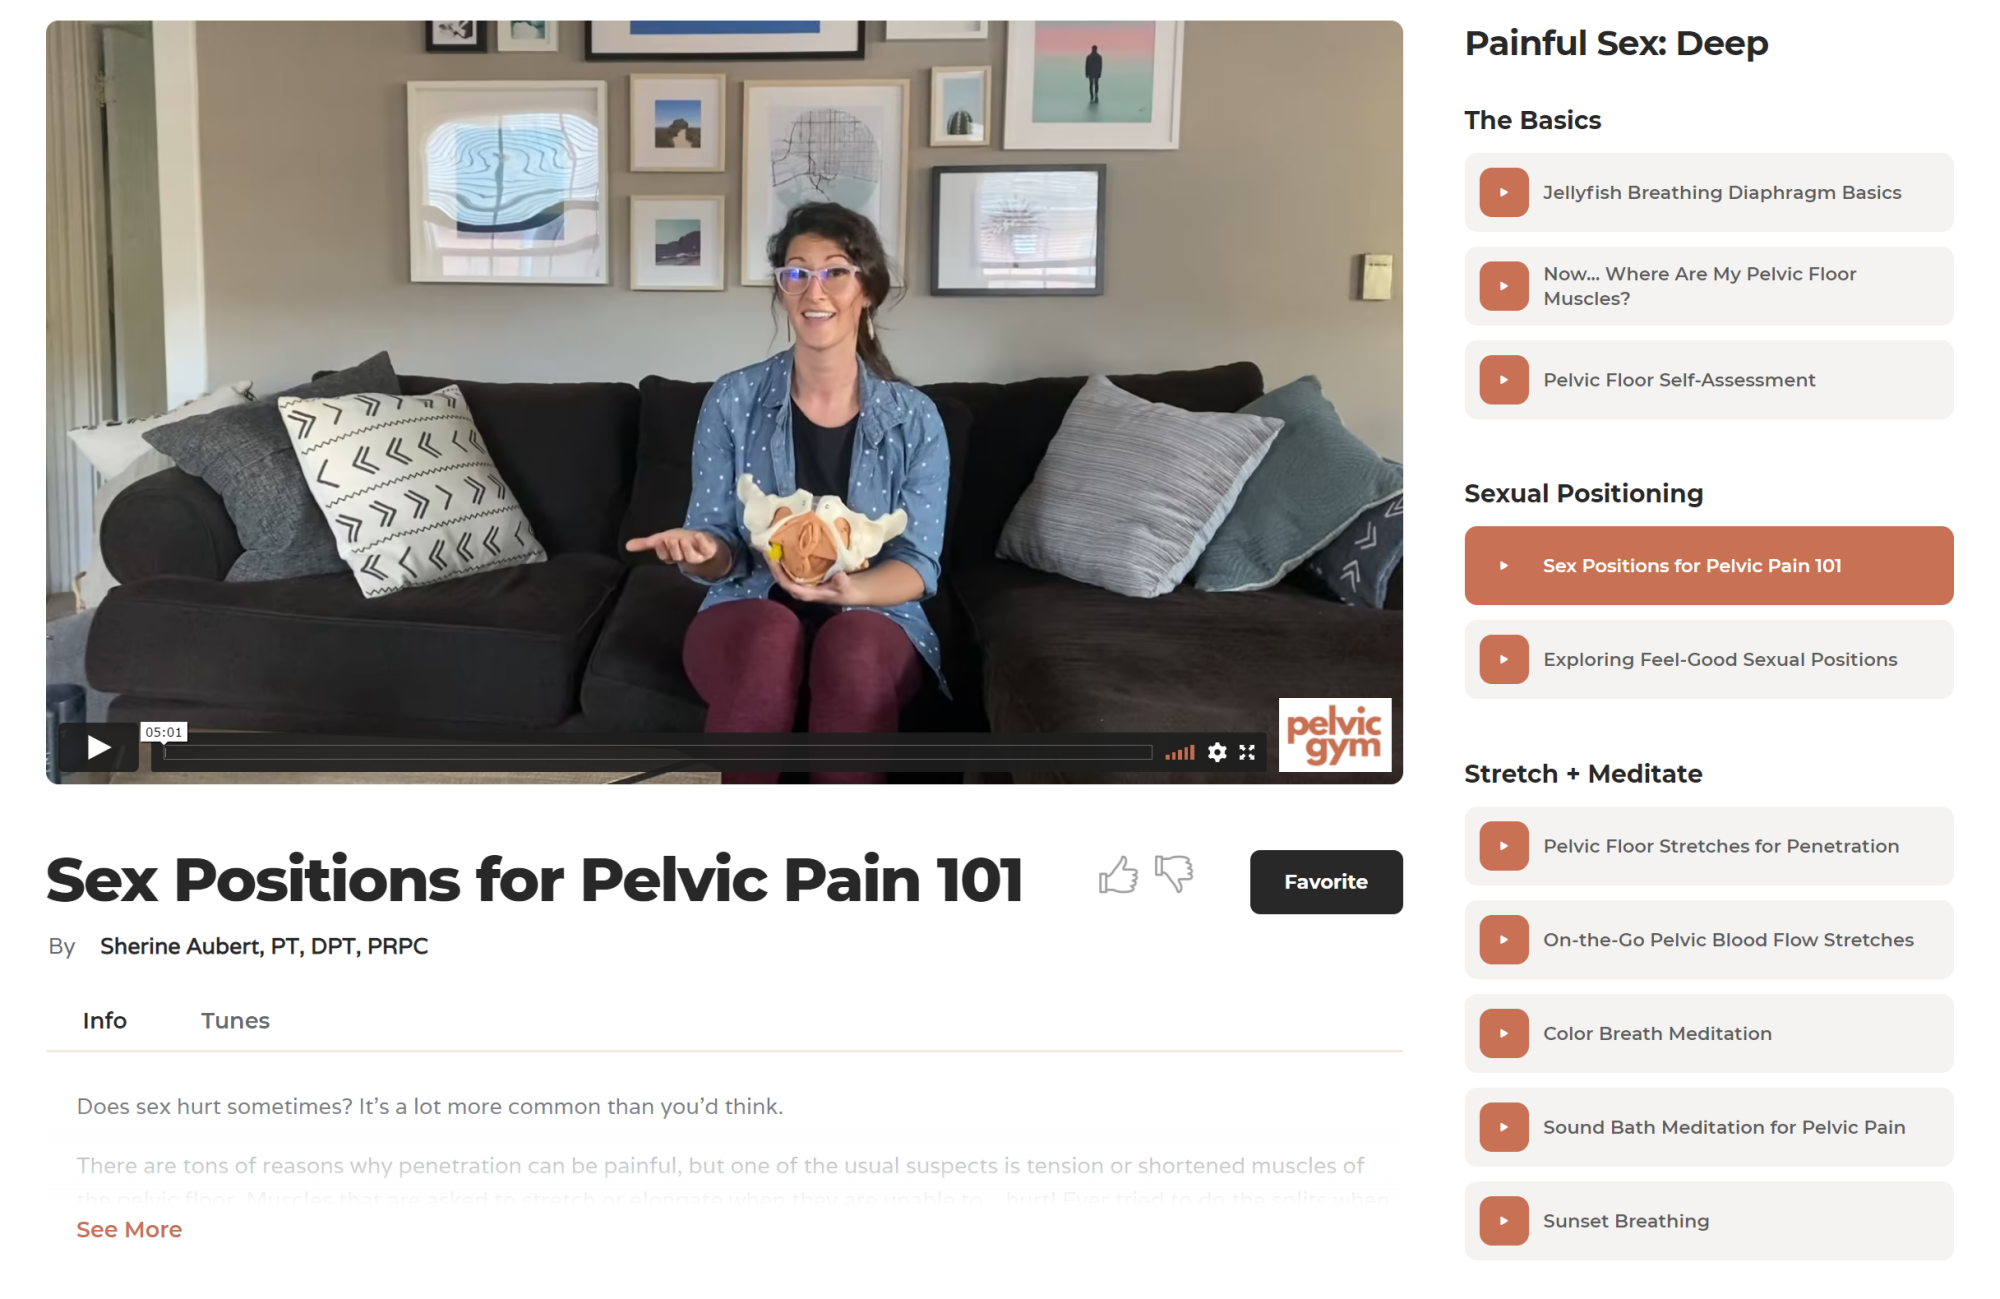 A video on sex positions within Pelvic Gym's "Painful Sex: Deep" program.